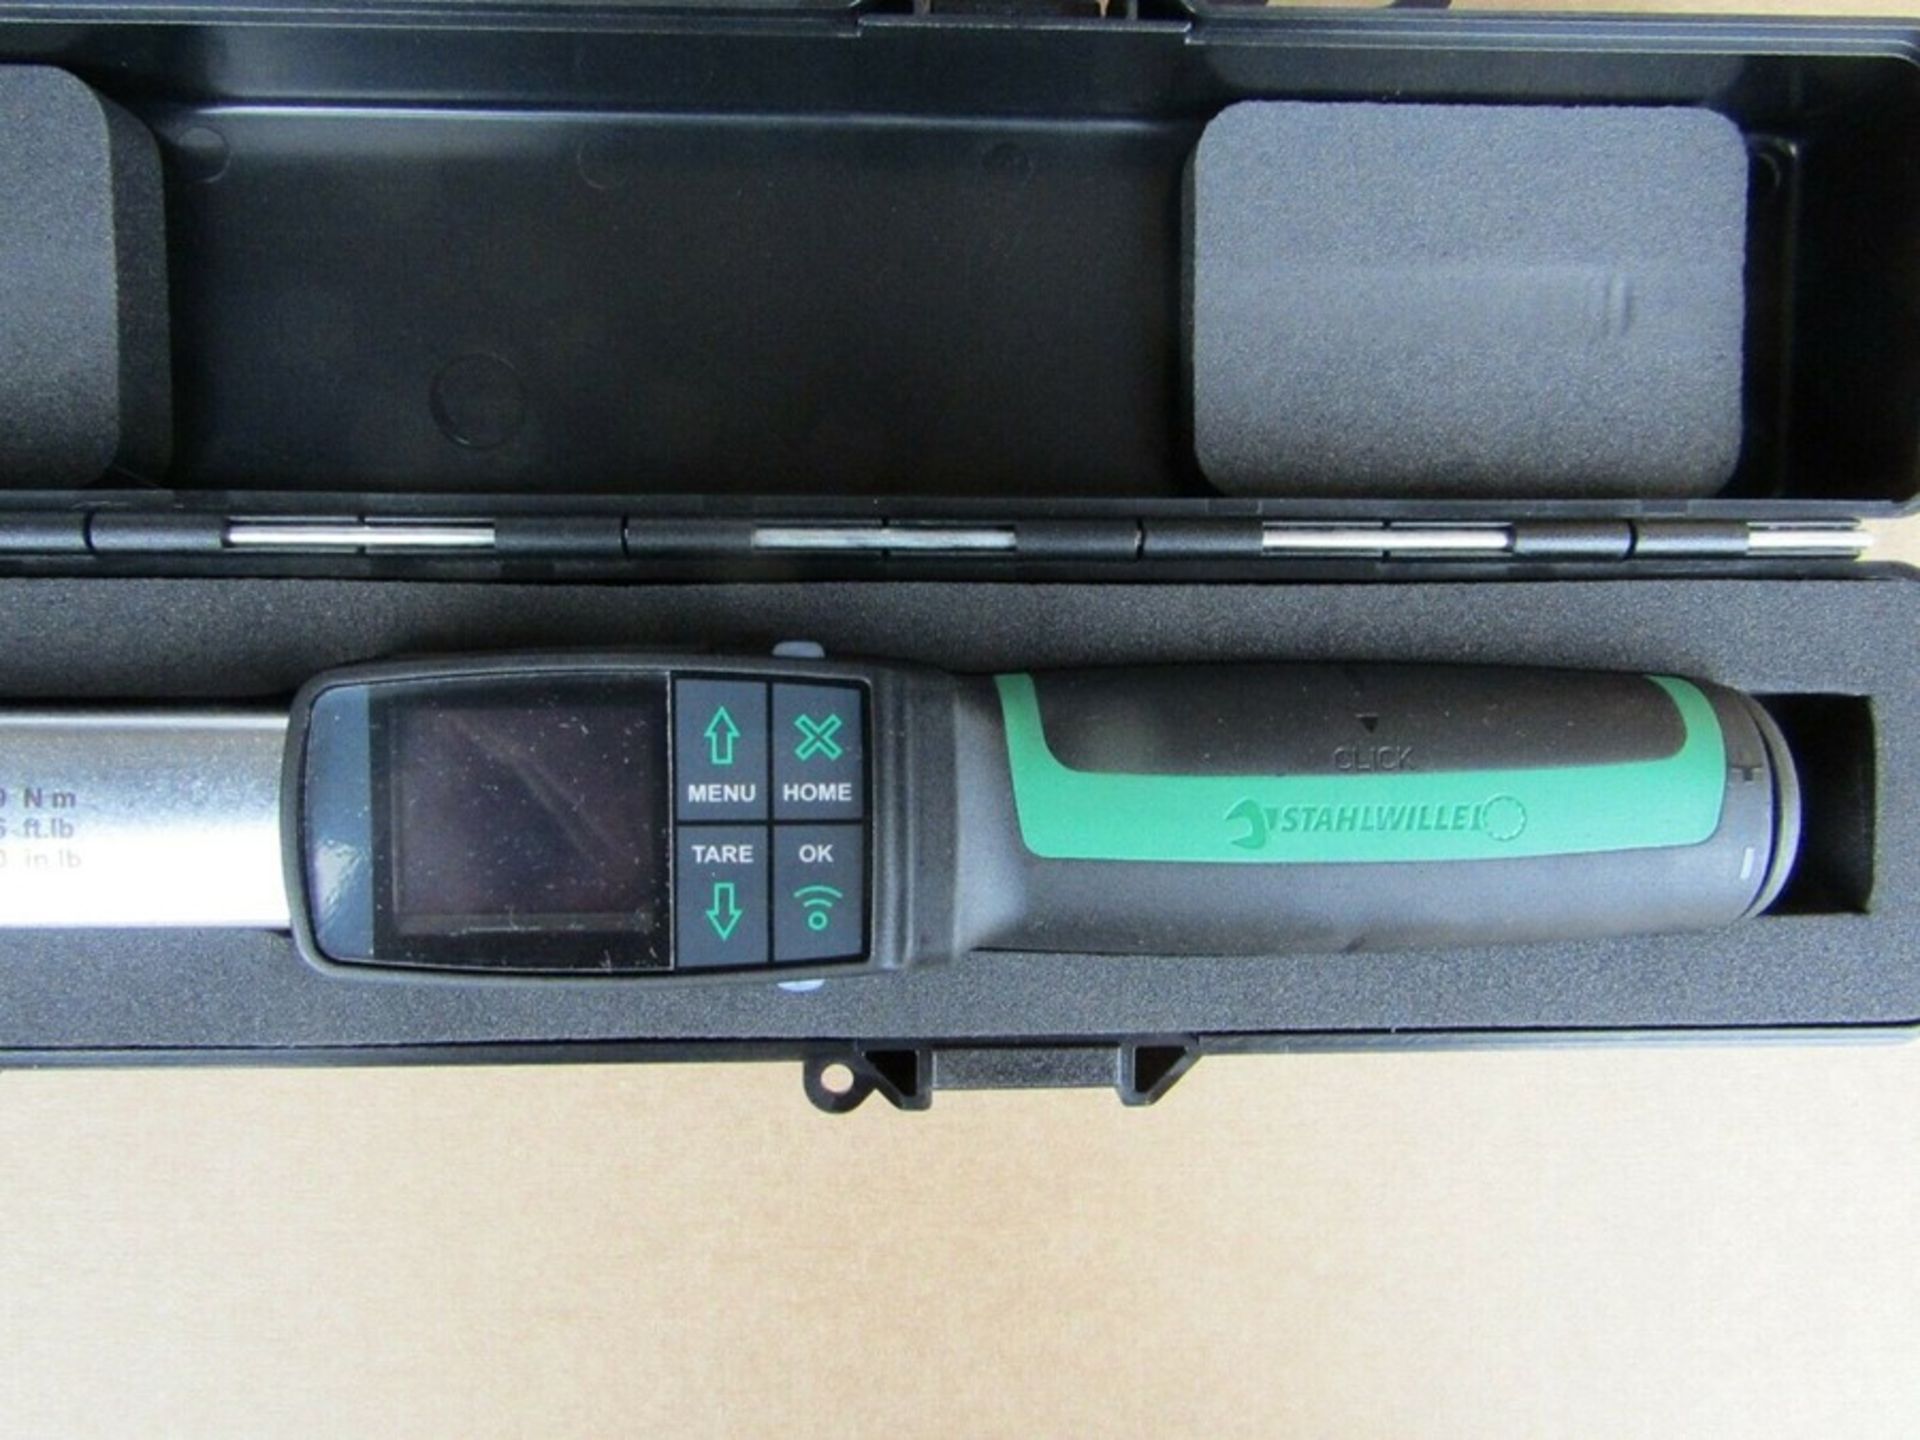 STAHLWILLE 1/2in Sq Drive Manoskop 714R Torque Wrench 10-100Nm - table 1278049 - Image 2 of 4